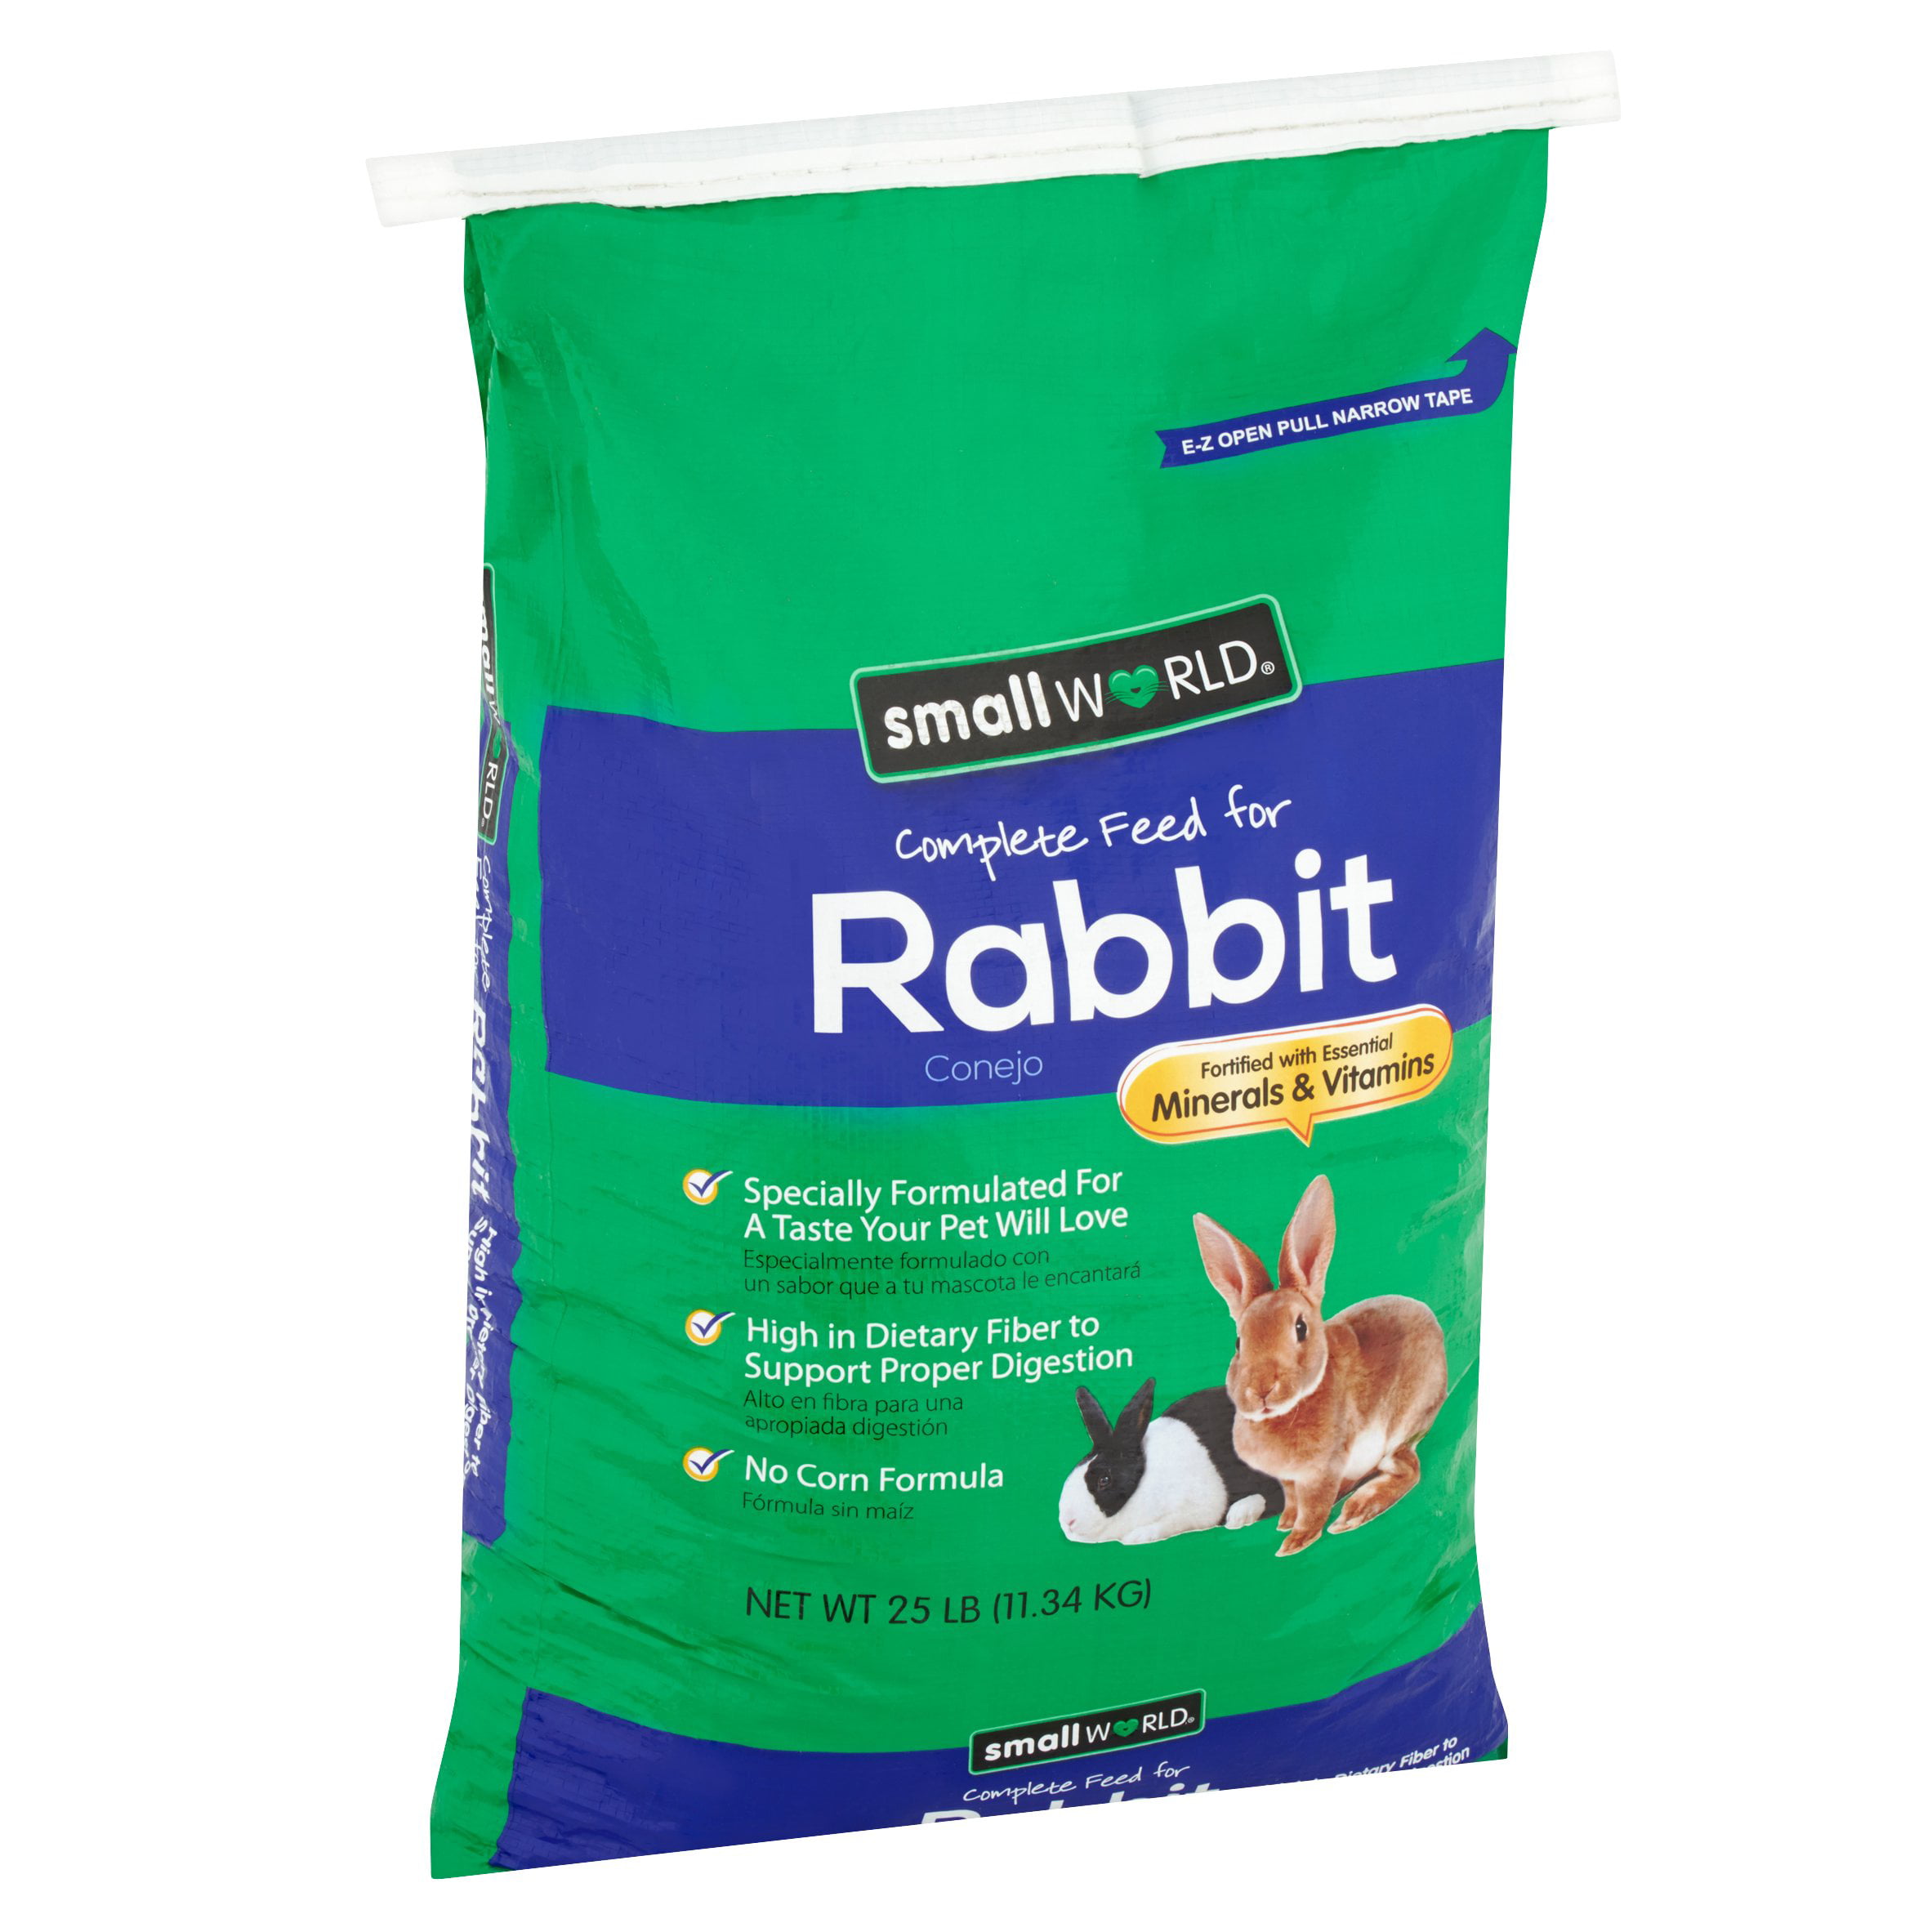 purina rabbit chow complete